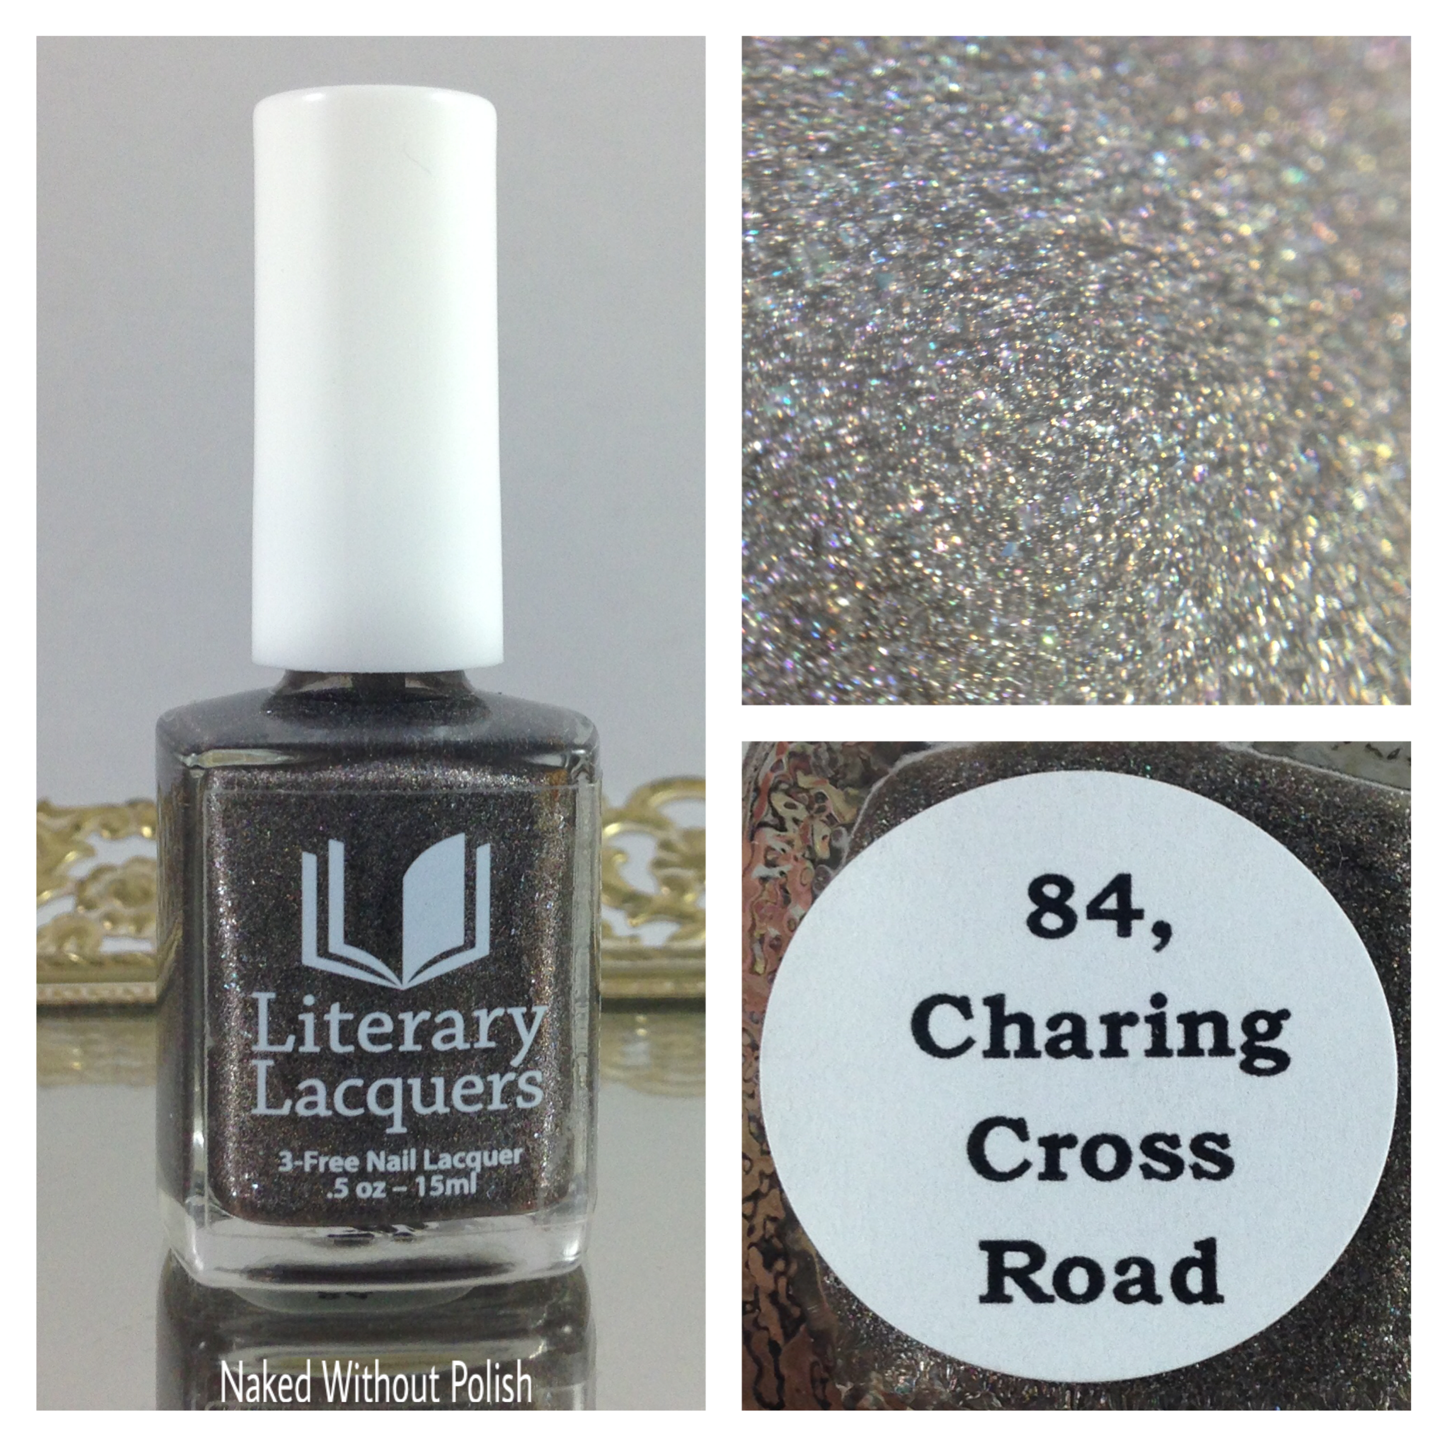 Literary-Lacquers-84-Charing-Cross-Road-1